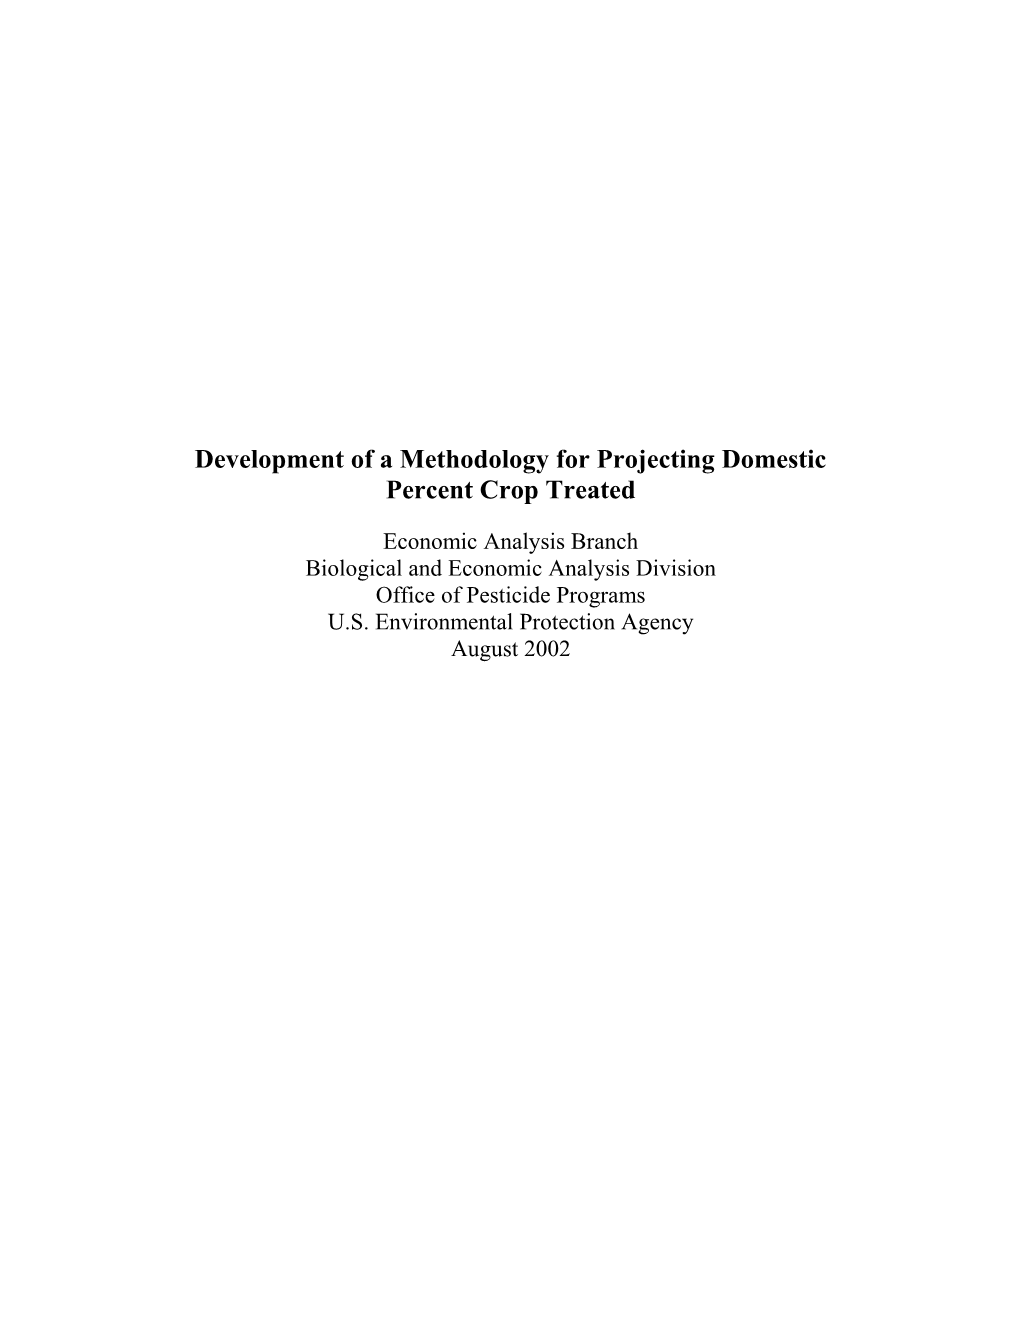 Development of a Methodology for Projecting Domestic Percent Crop Treated